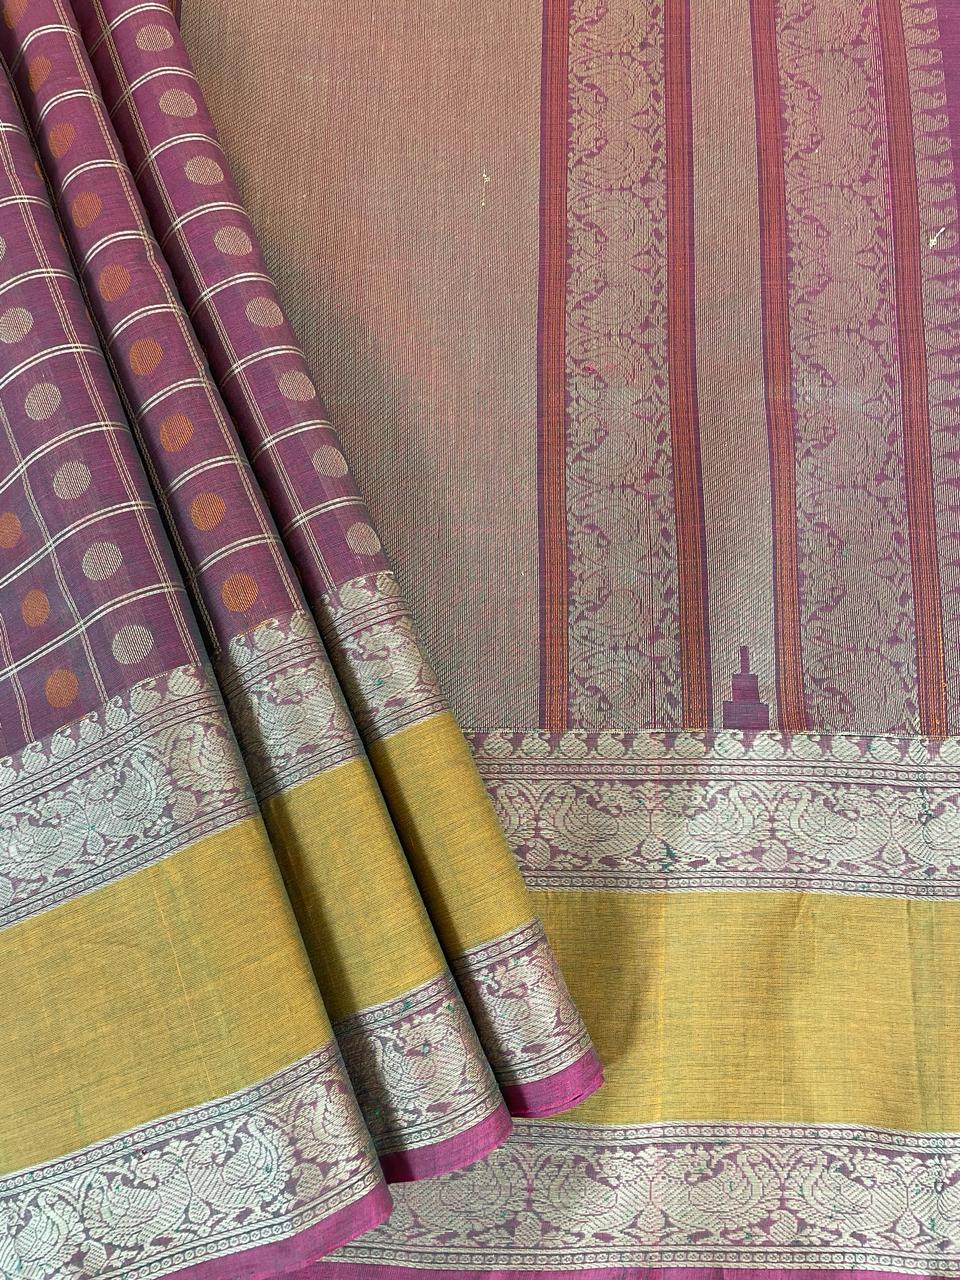 Parijat collections - 1000 butta kanchi cotton saree with contrast border .  ||COST 4650INR || . .wats up at 9500094822 . . Www.parijatstore.com We ship  worldwide * every saree is curated and